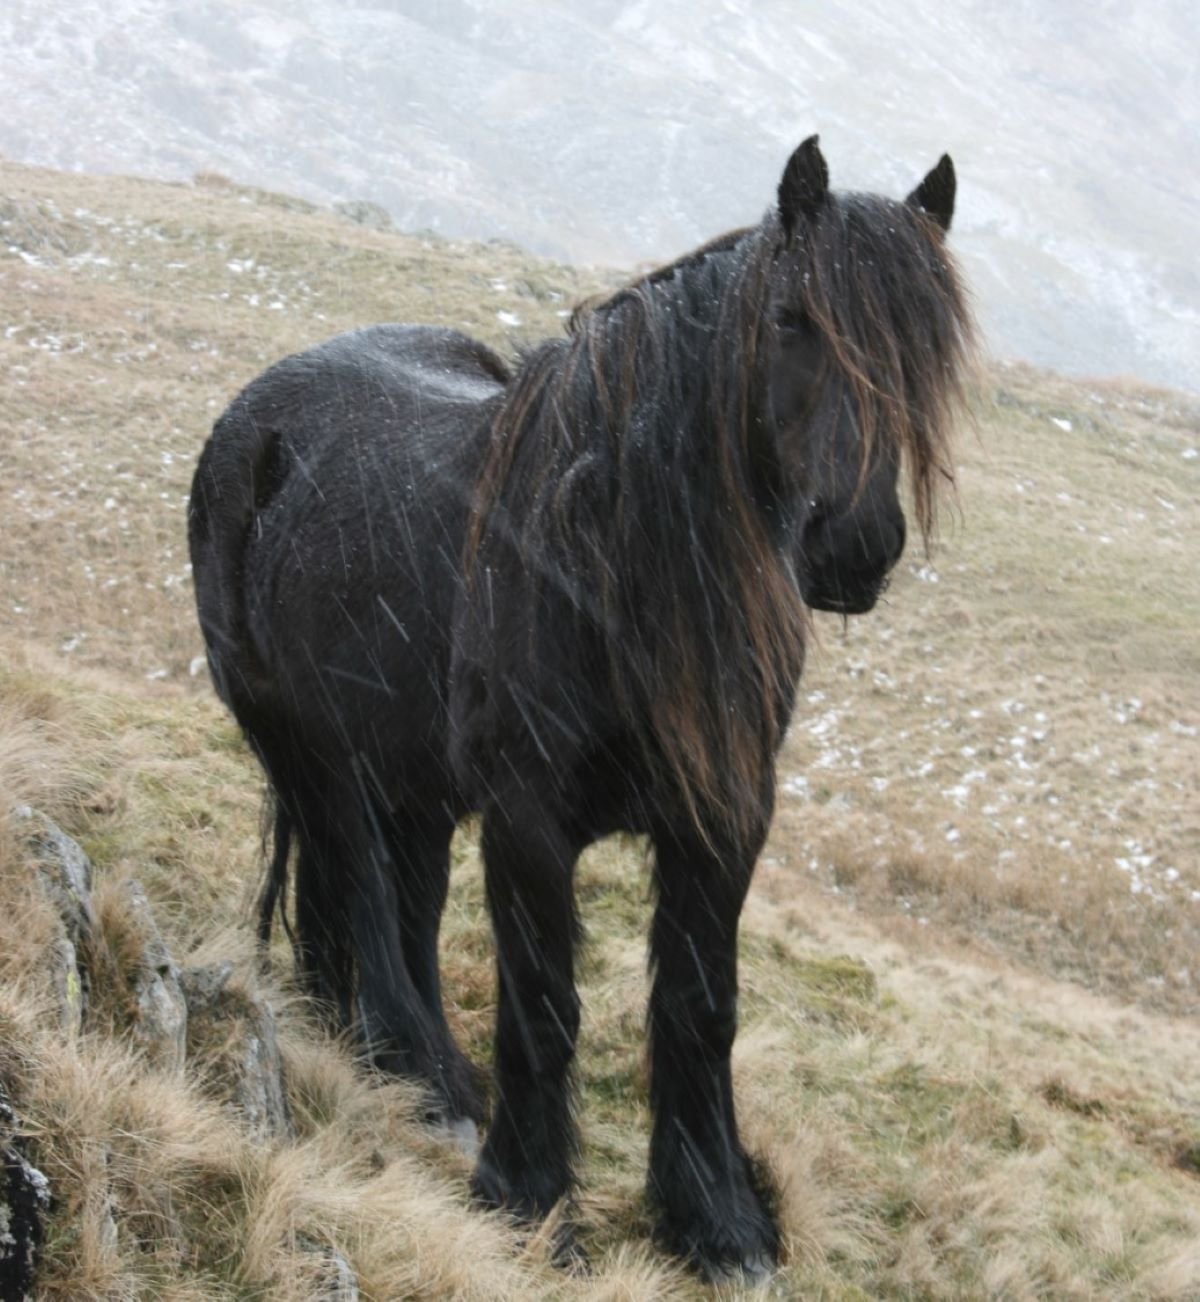 Fell pony on a wintry mountainside